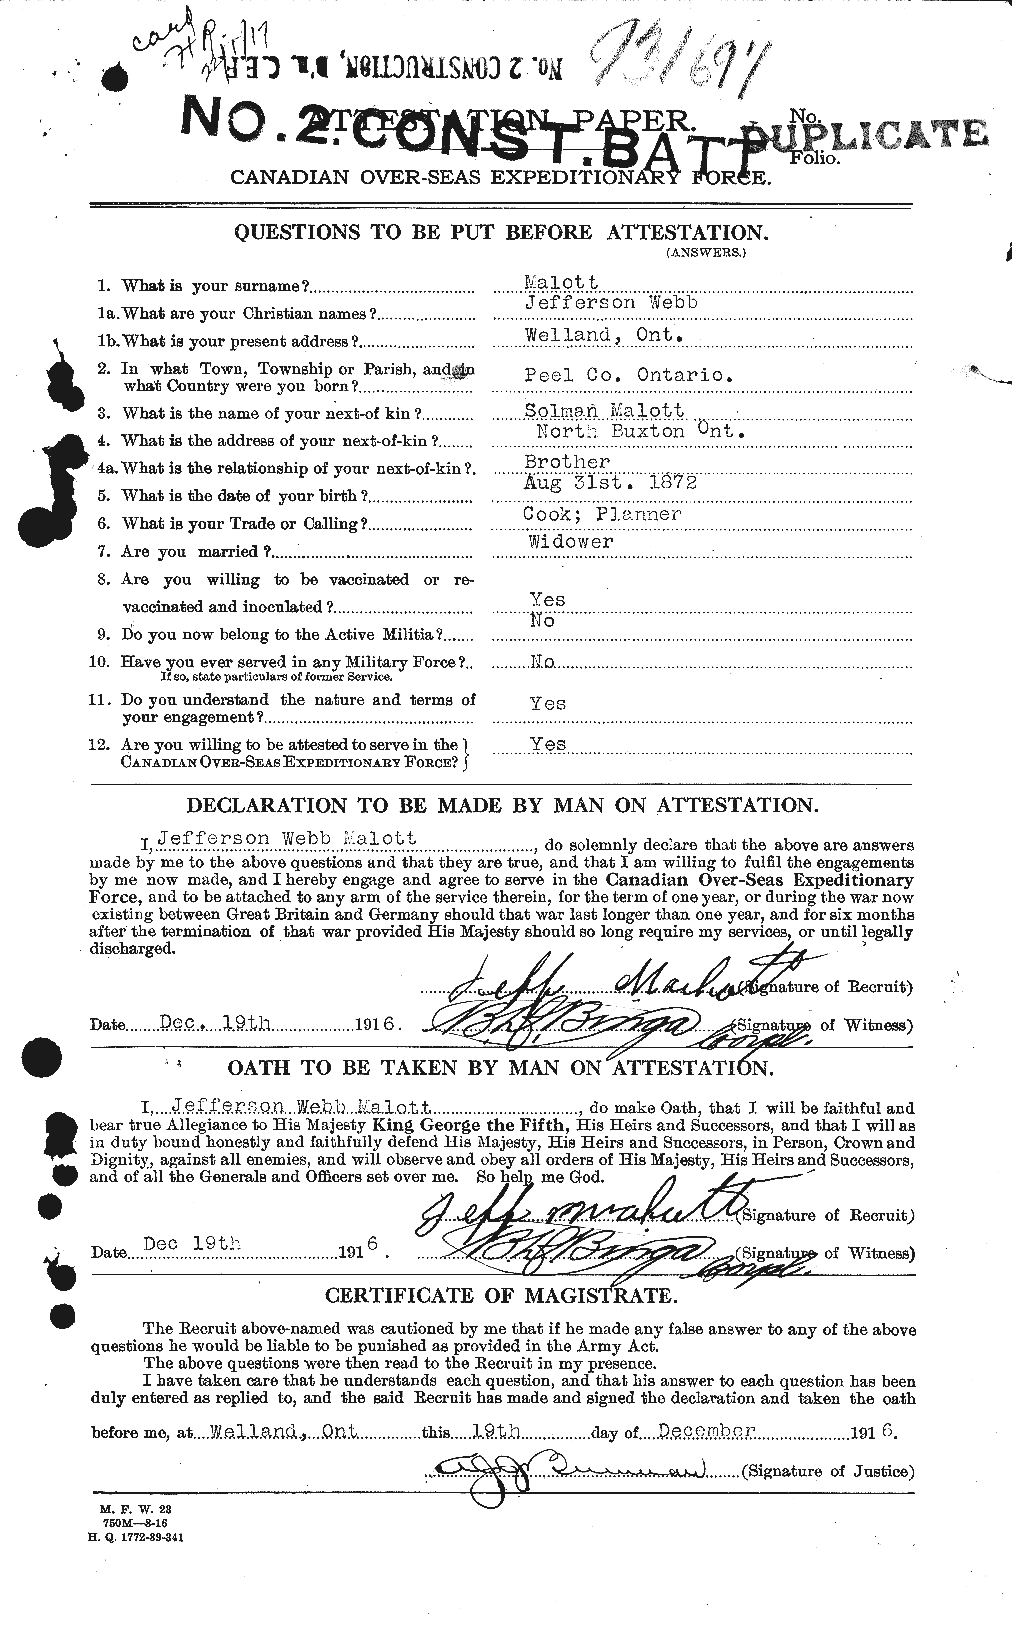 Personnel Records of the First World War - CEF 479059a